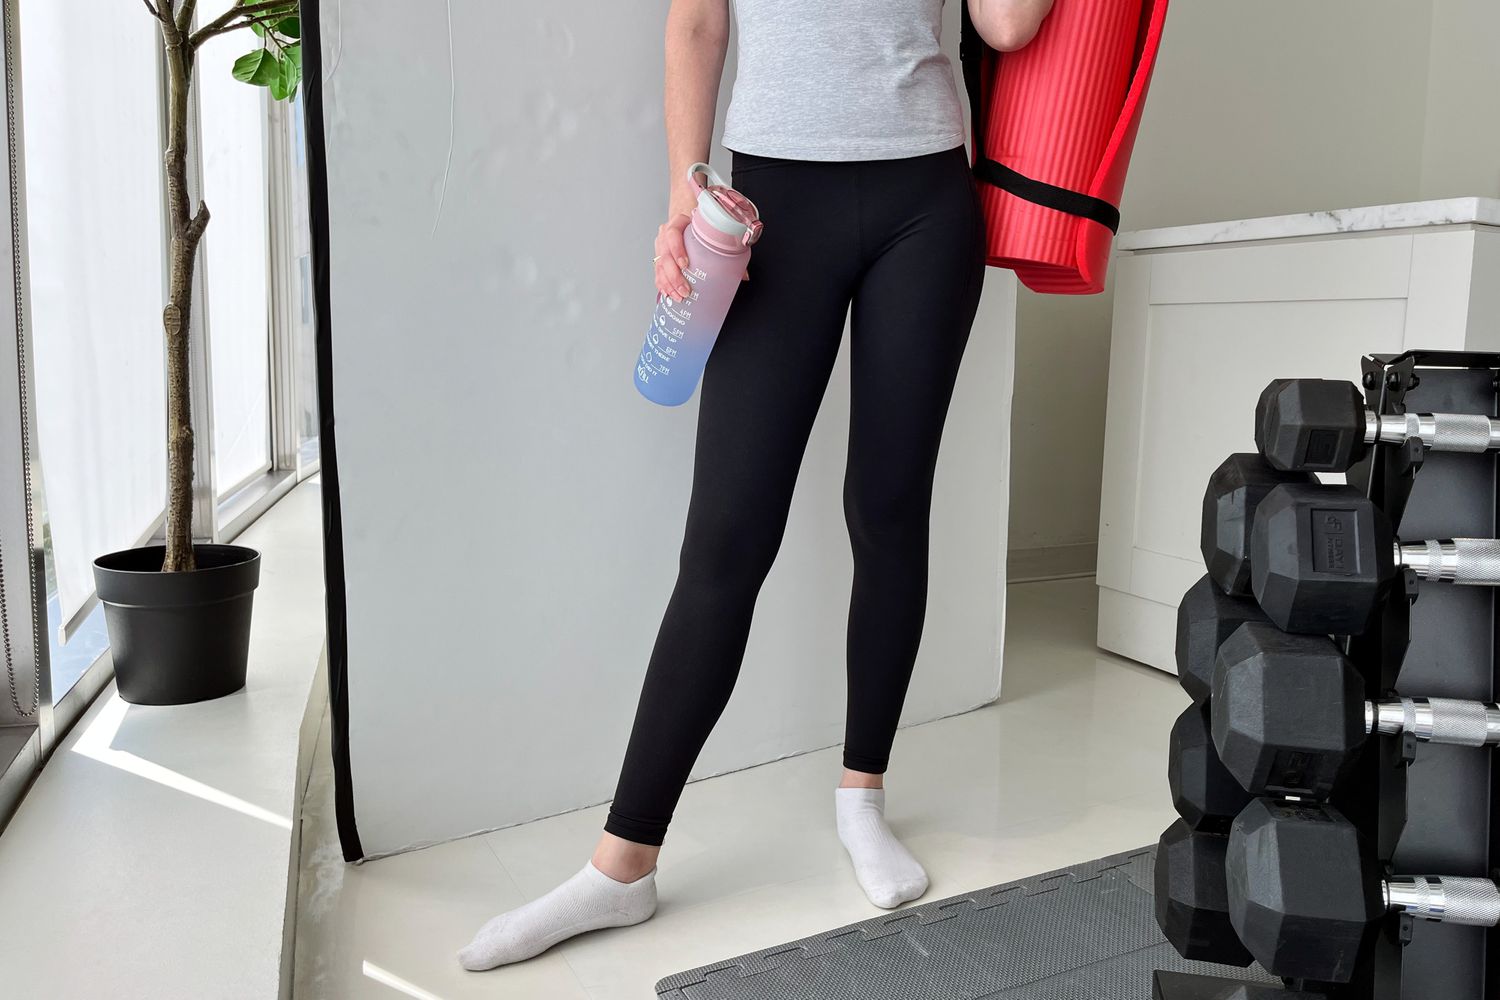 Person wearing Athleta leggings and holding a yoga mat and water bottle